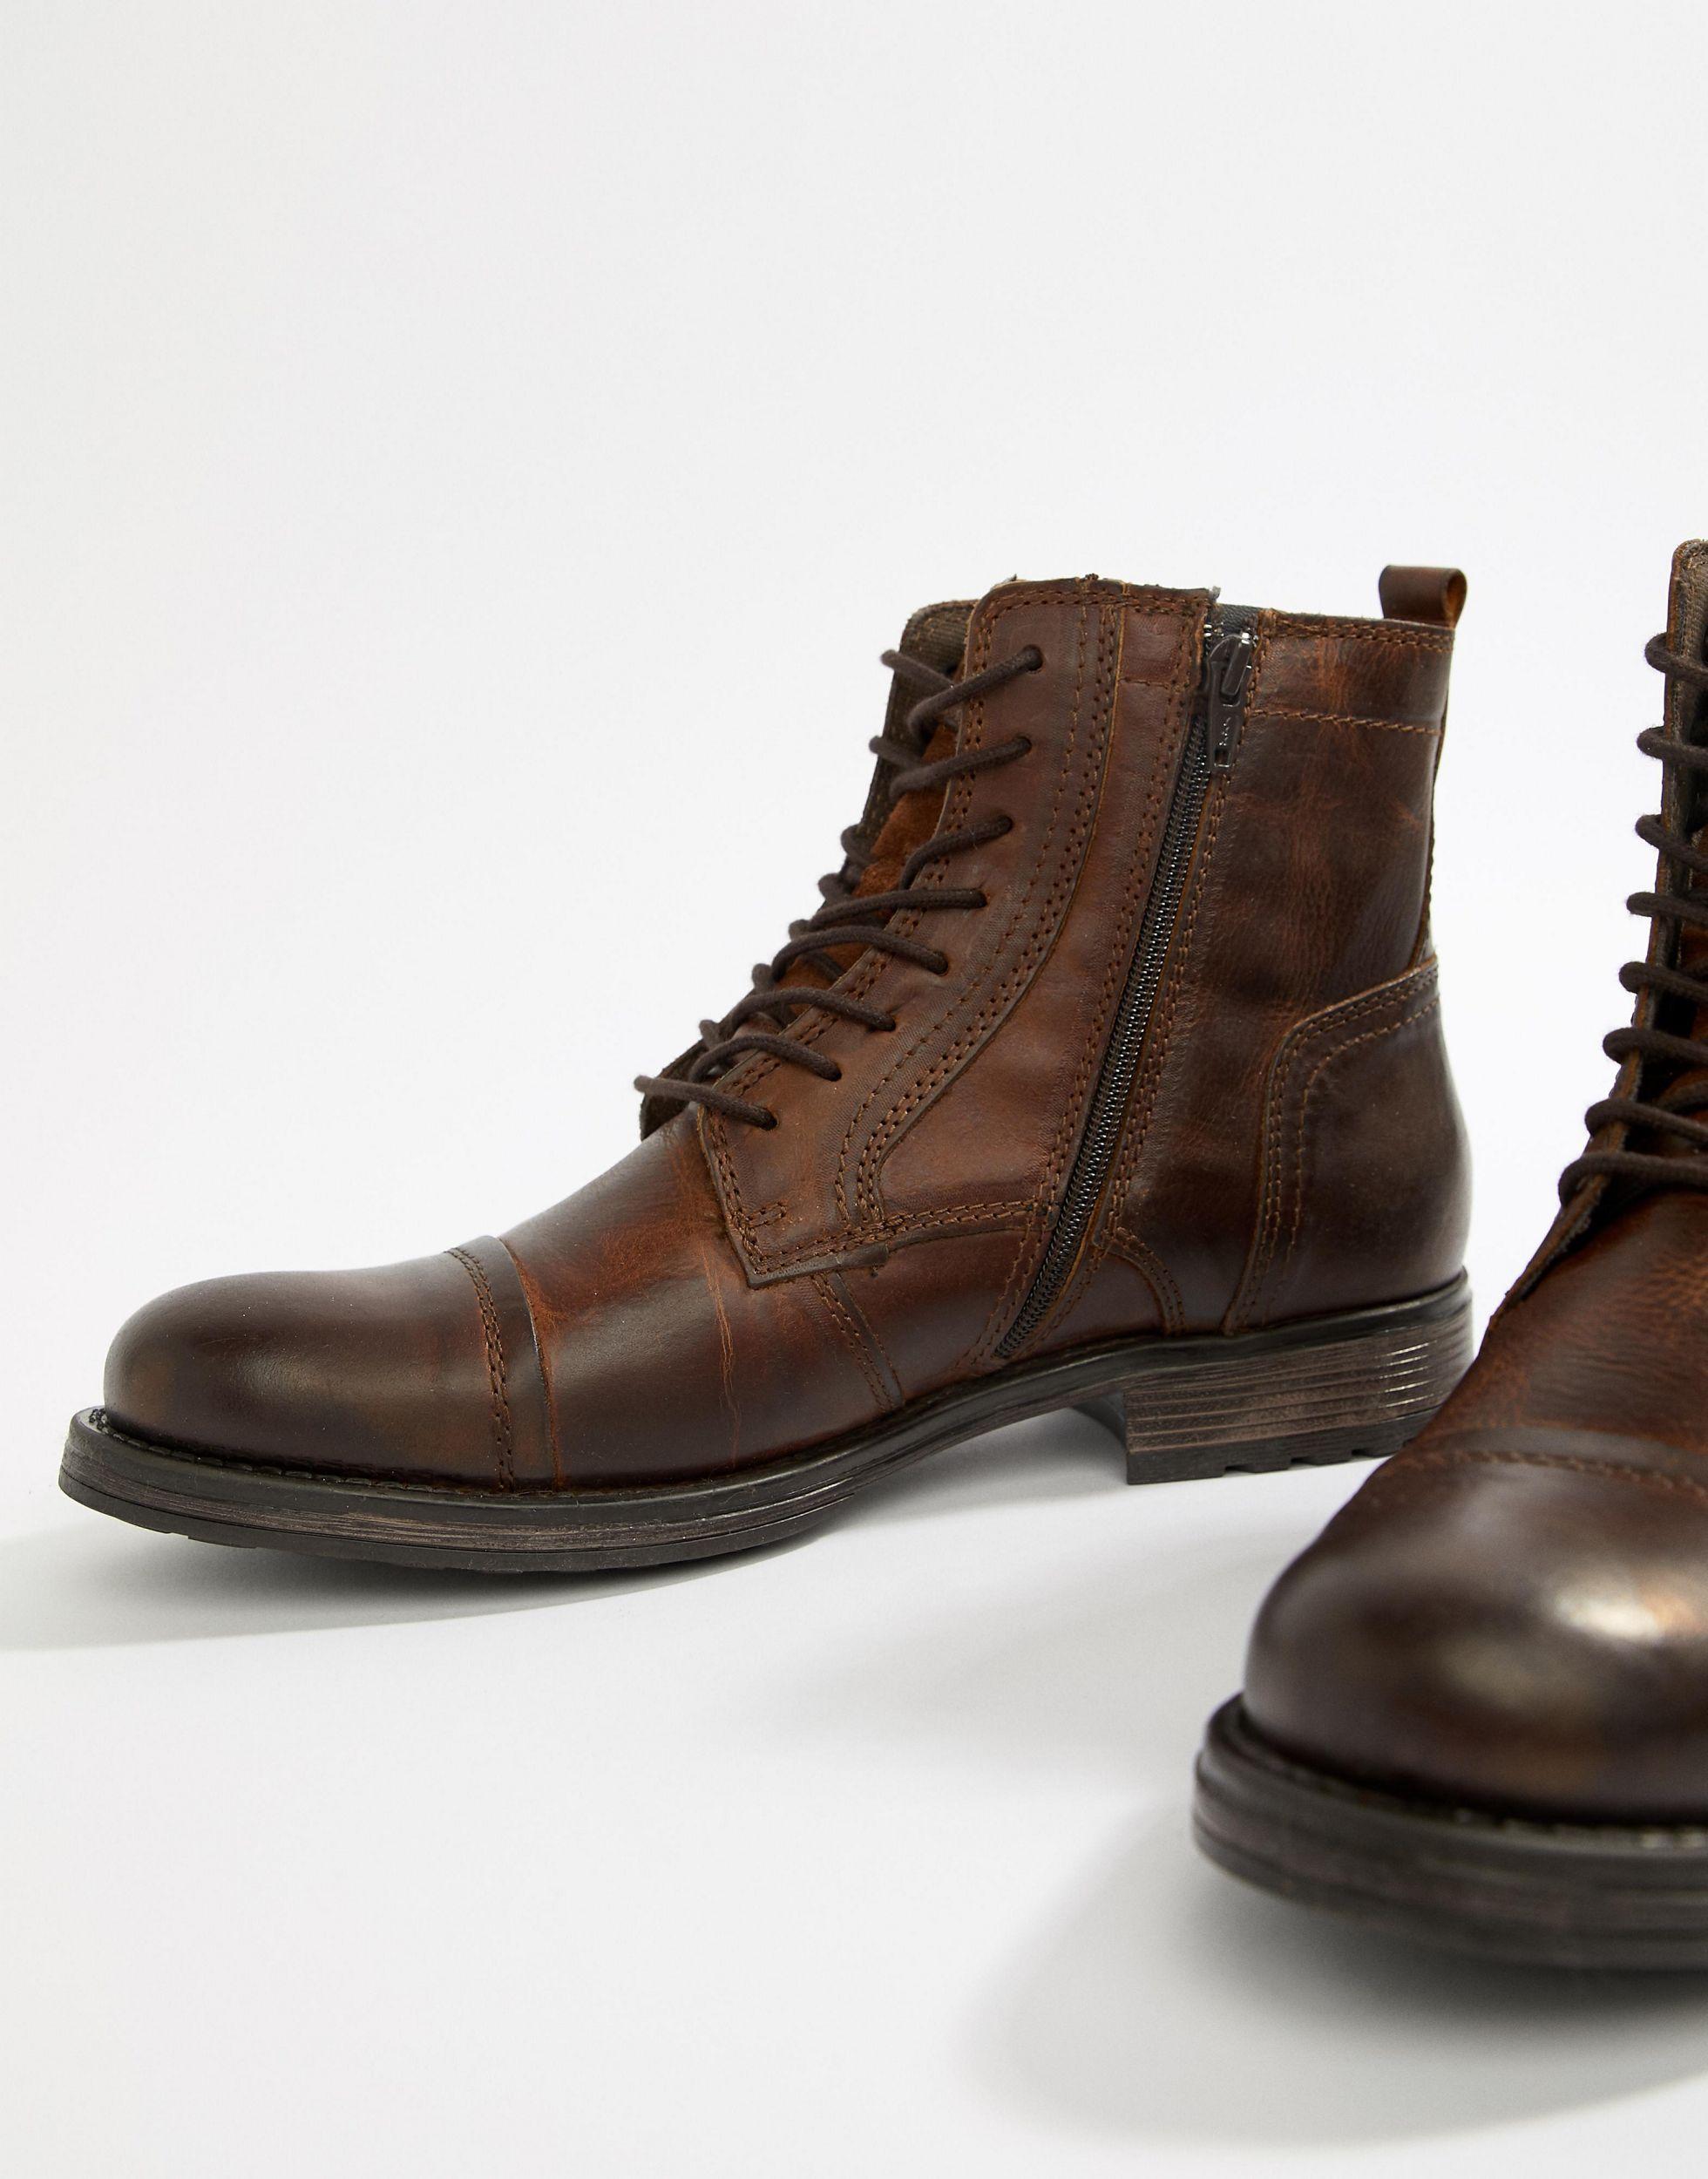 Jack & Jones Leather Boot With Side Zip in Brown for Men | Lyst